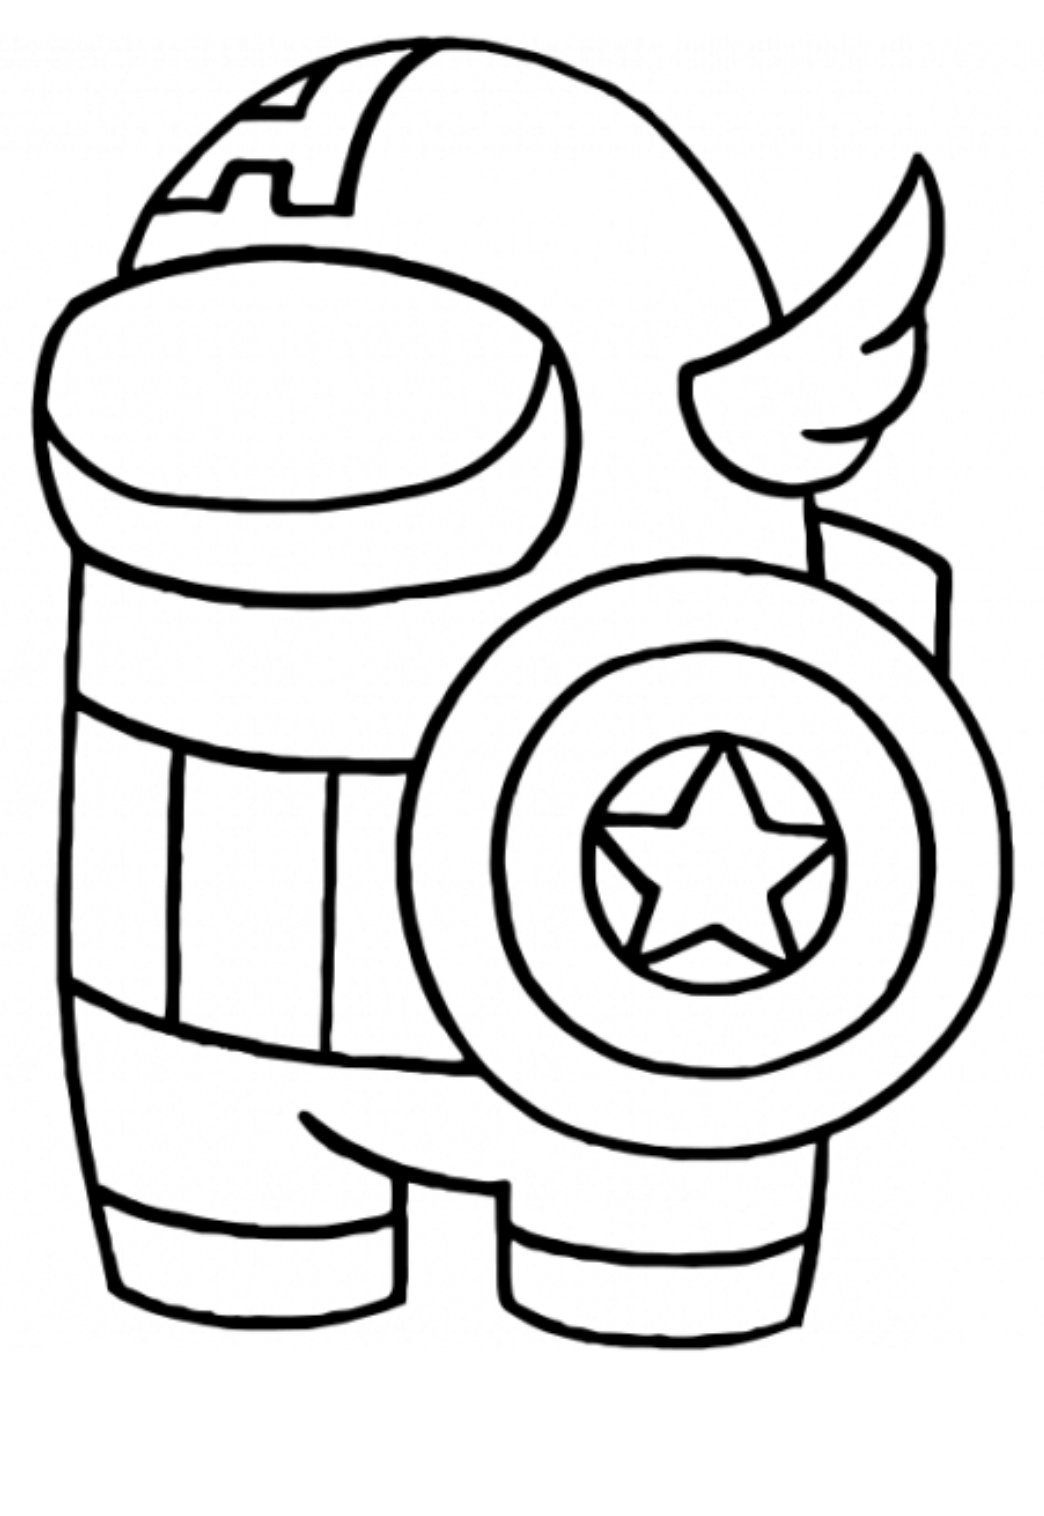 Free printable among us captain america coloring page sheet and picture for adults and kids girls and boys